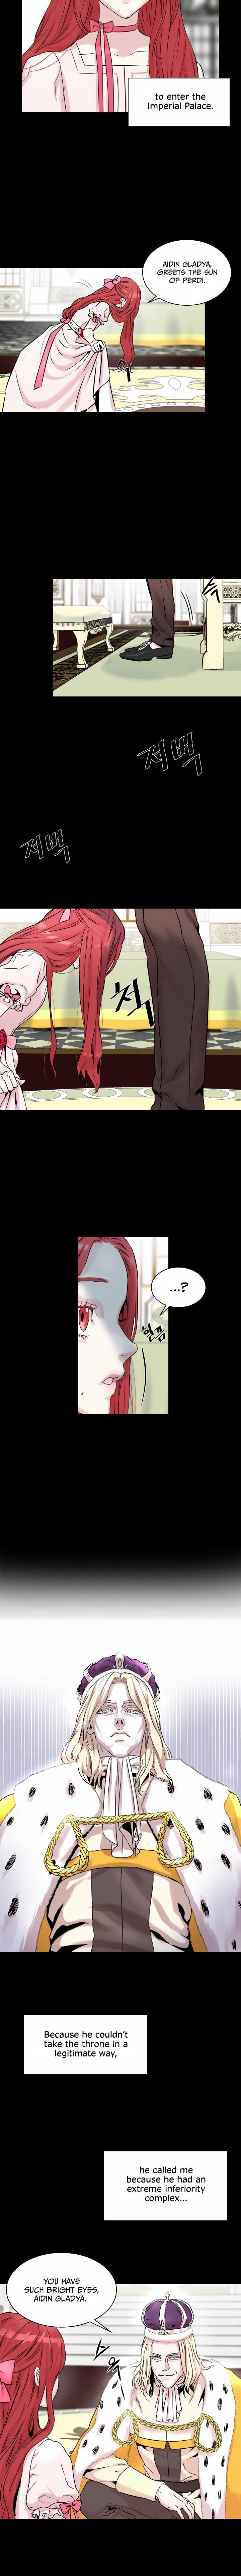 Aideen - Chapter 3 Page 6